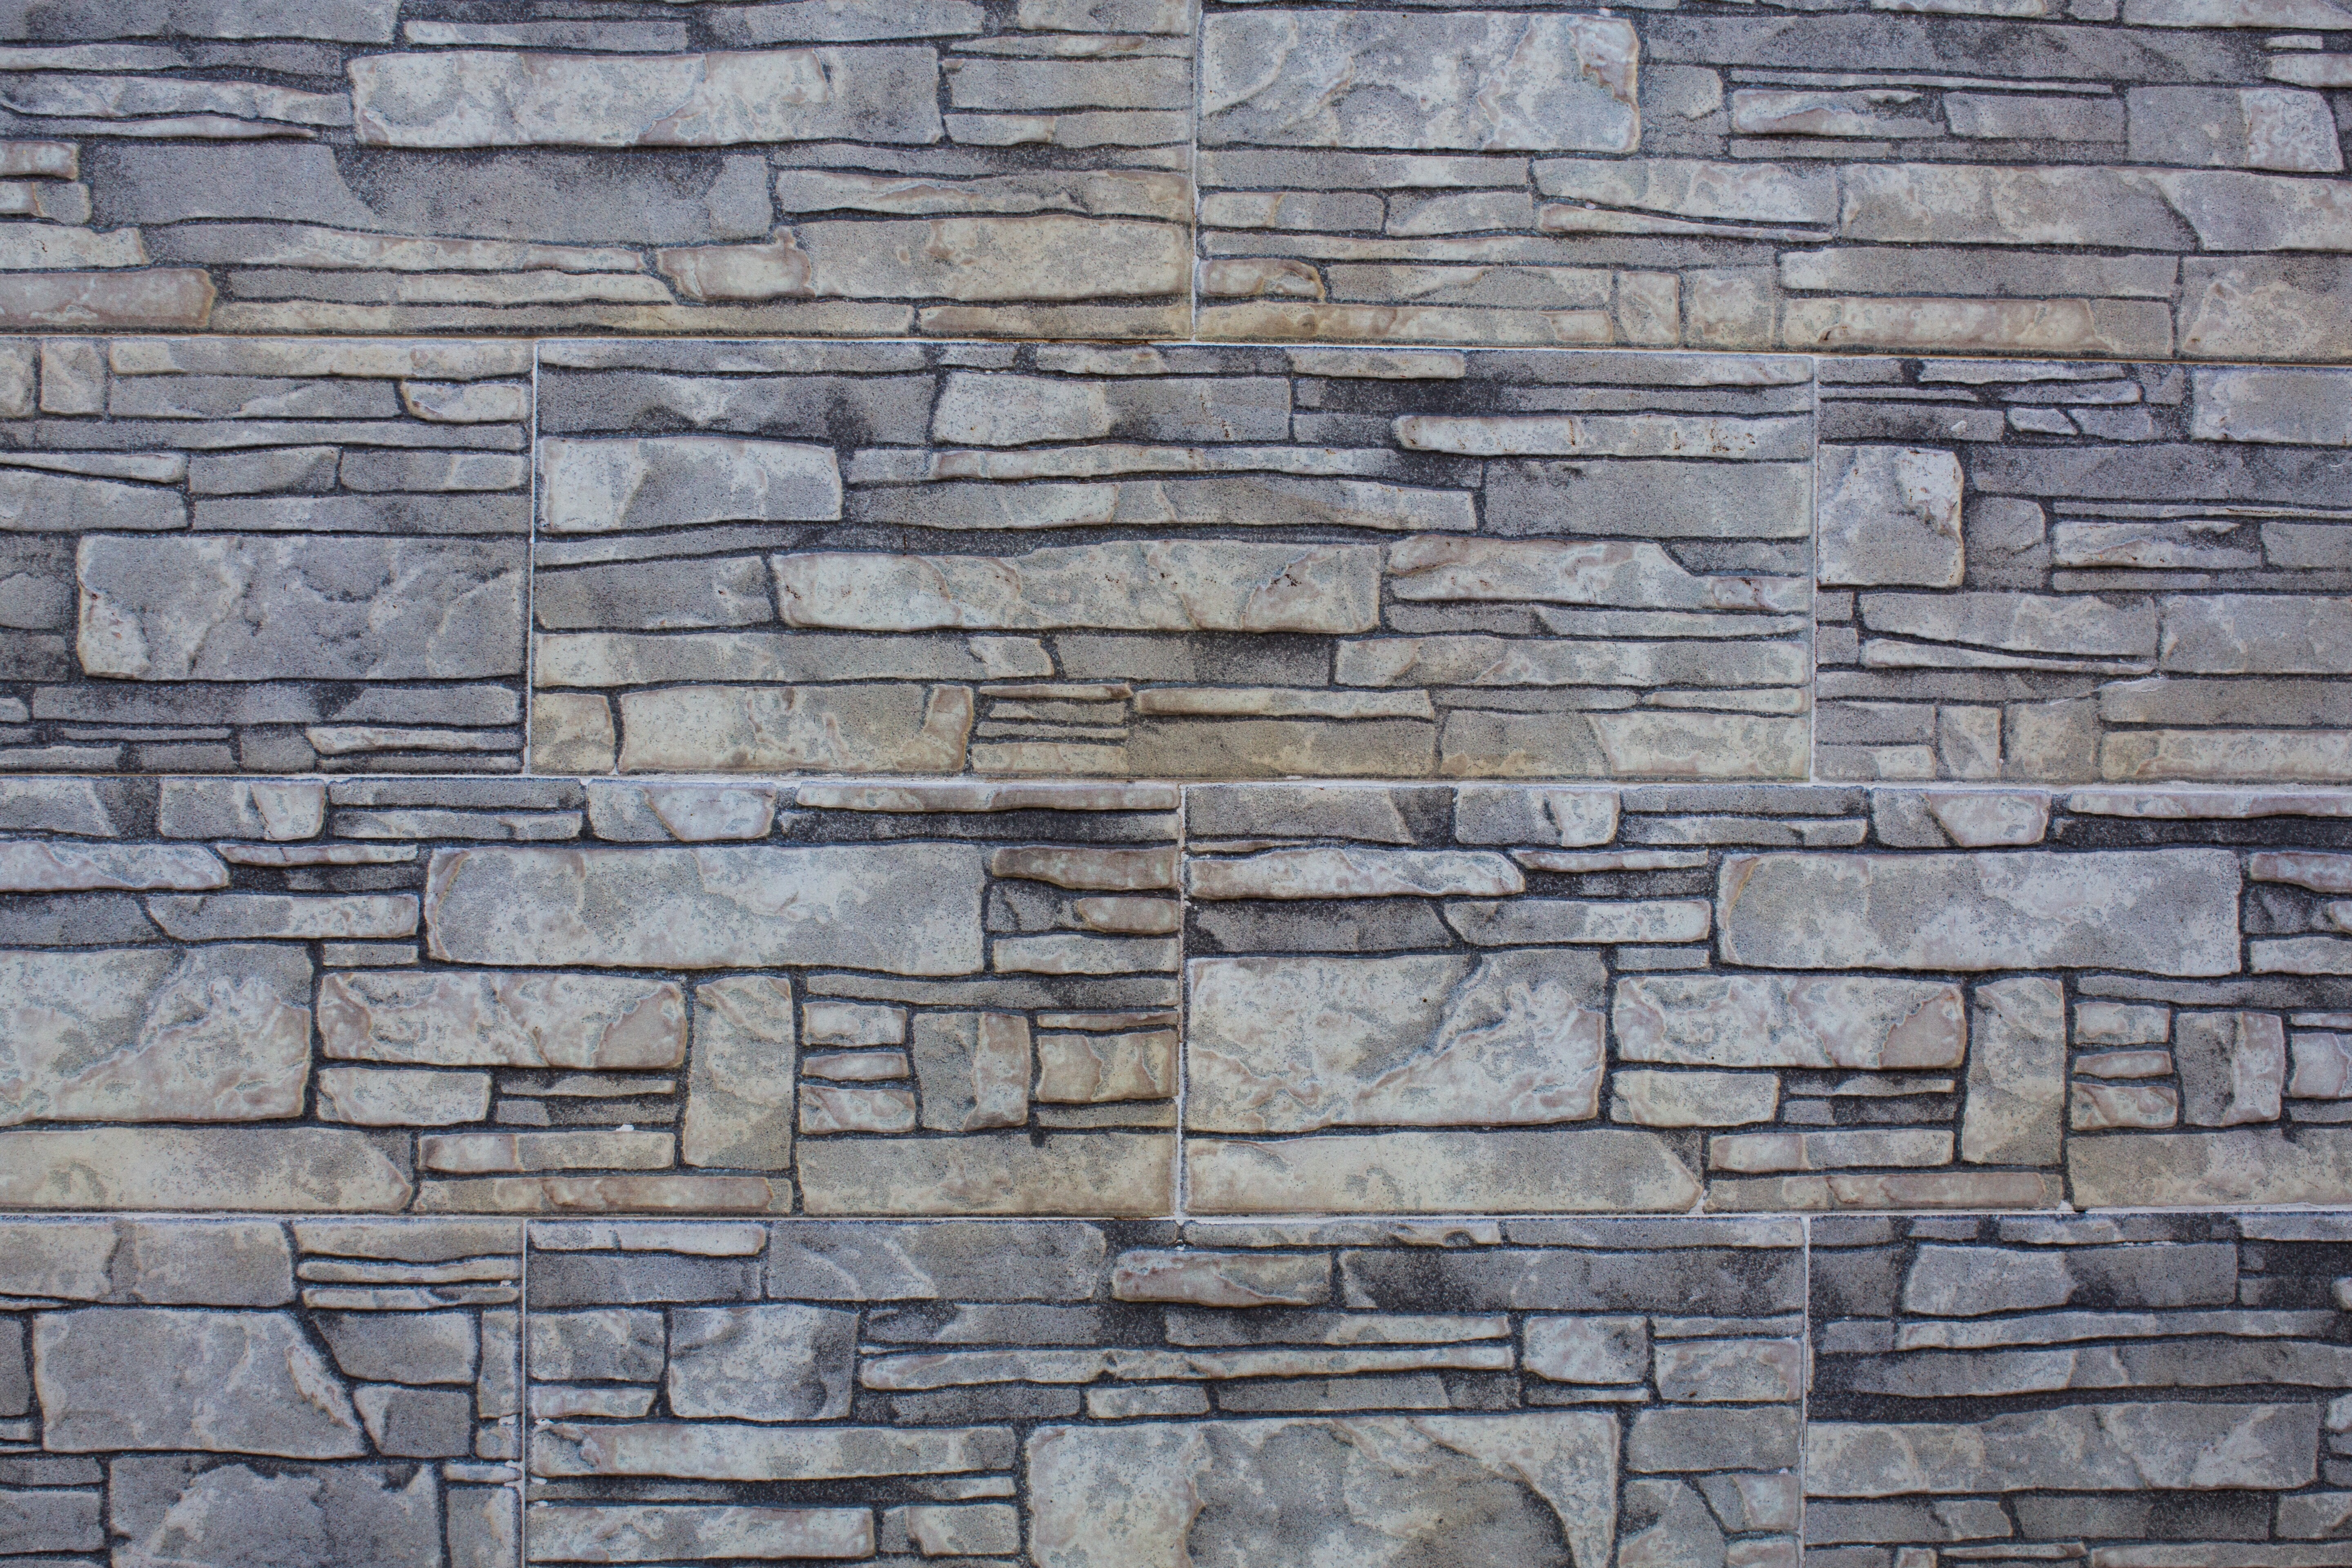 freetoedit-texture-stone-wall-background-image-by-grig15